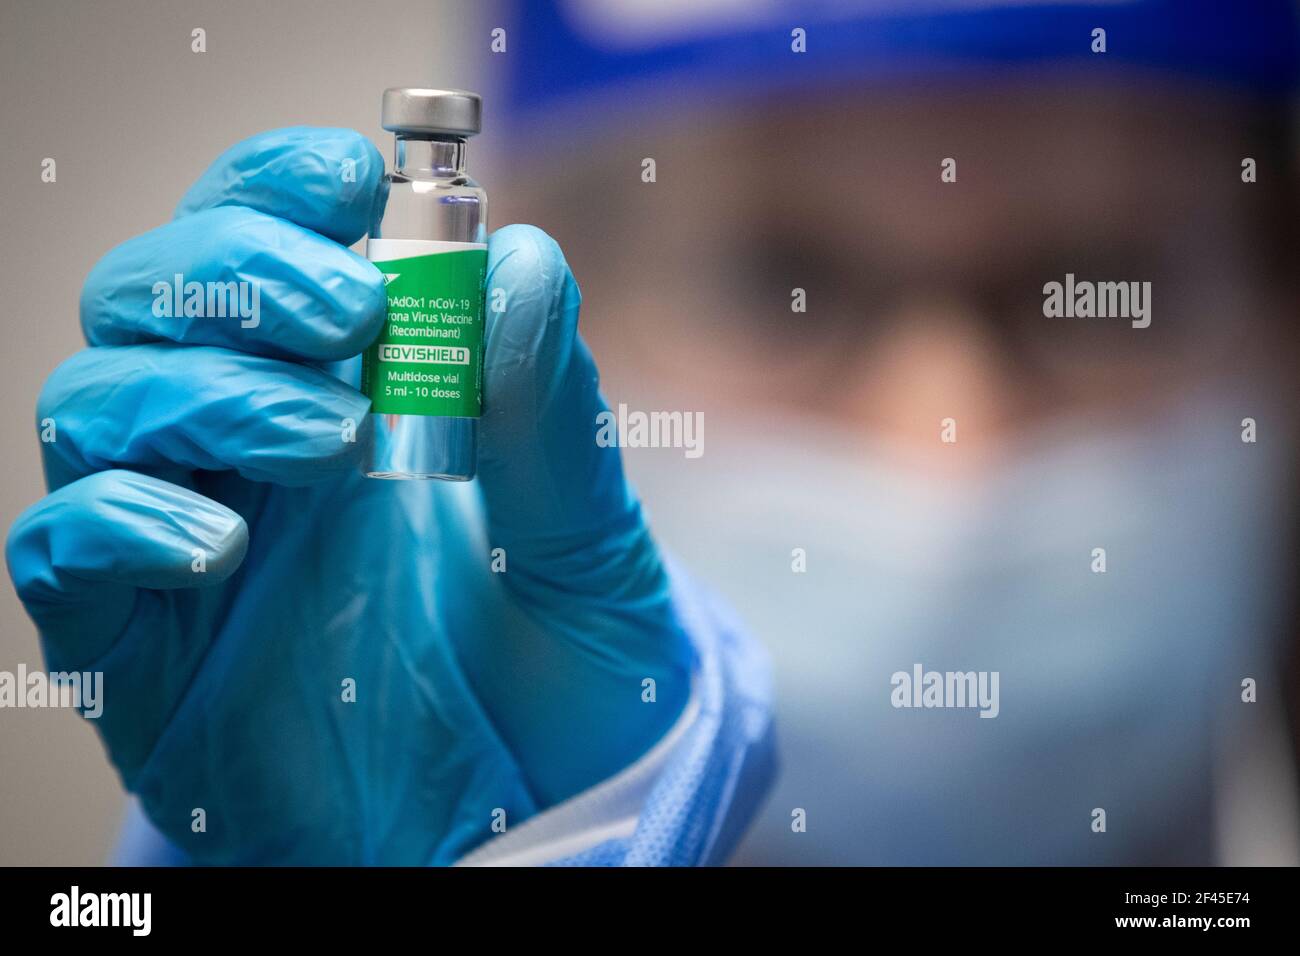 A vial of the AstraZeneca COVID-19 vaccine at a pharmacy in Amherstview, Ontario on Tuesday, March 16, 2021, as the COVID-19 pandemic continues across Stock Photo